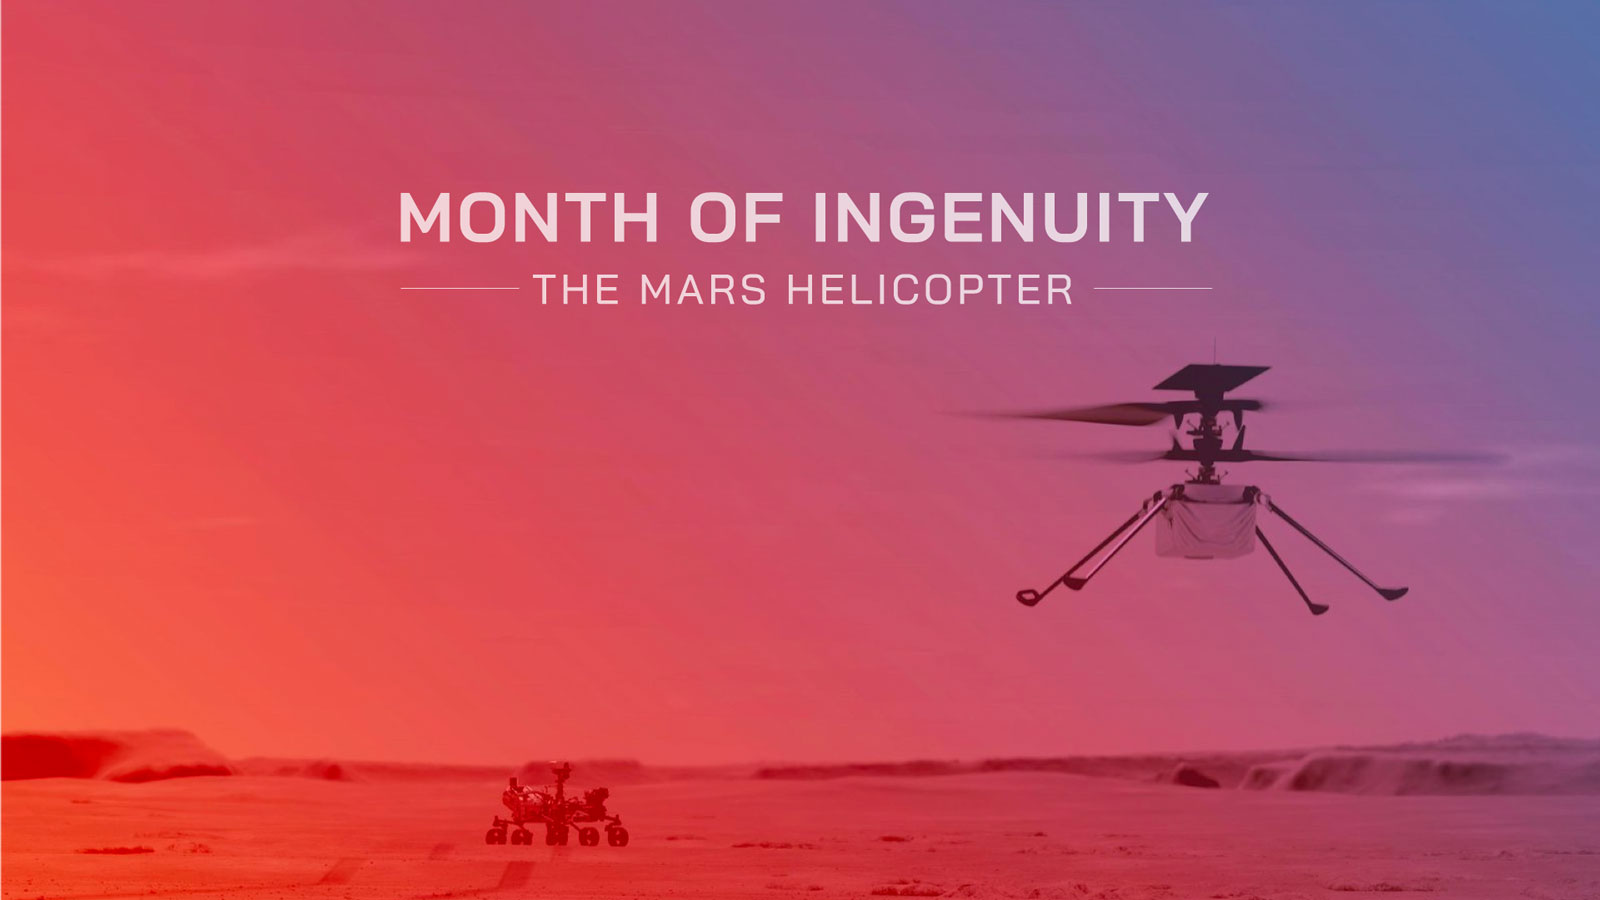 Illustration envisions Mars Helicopter during a flight attempt above the Red Planet